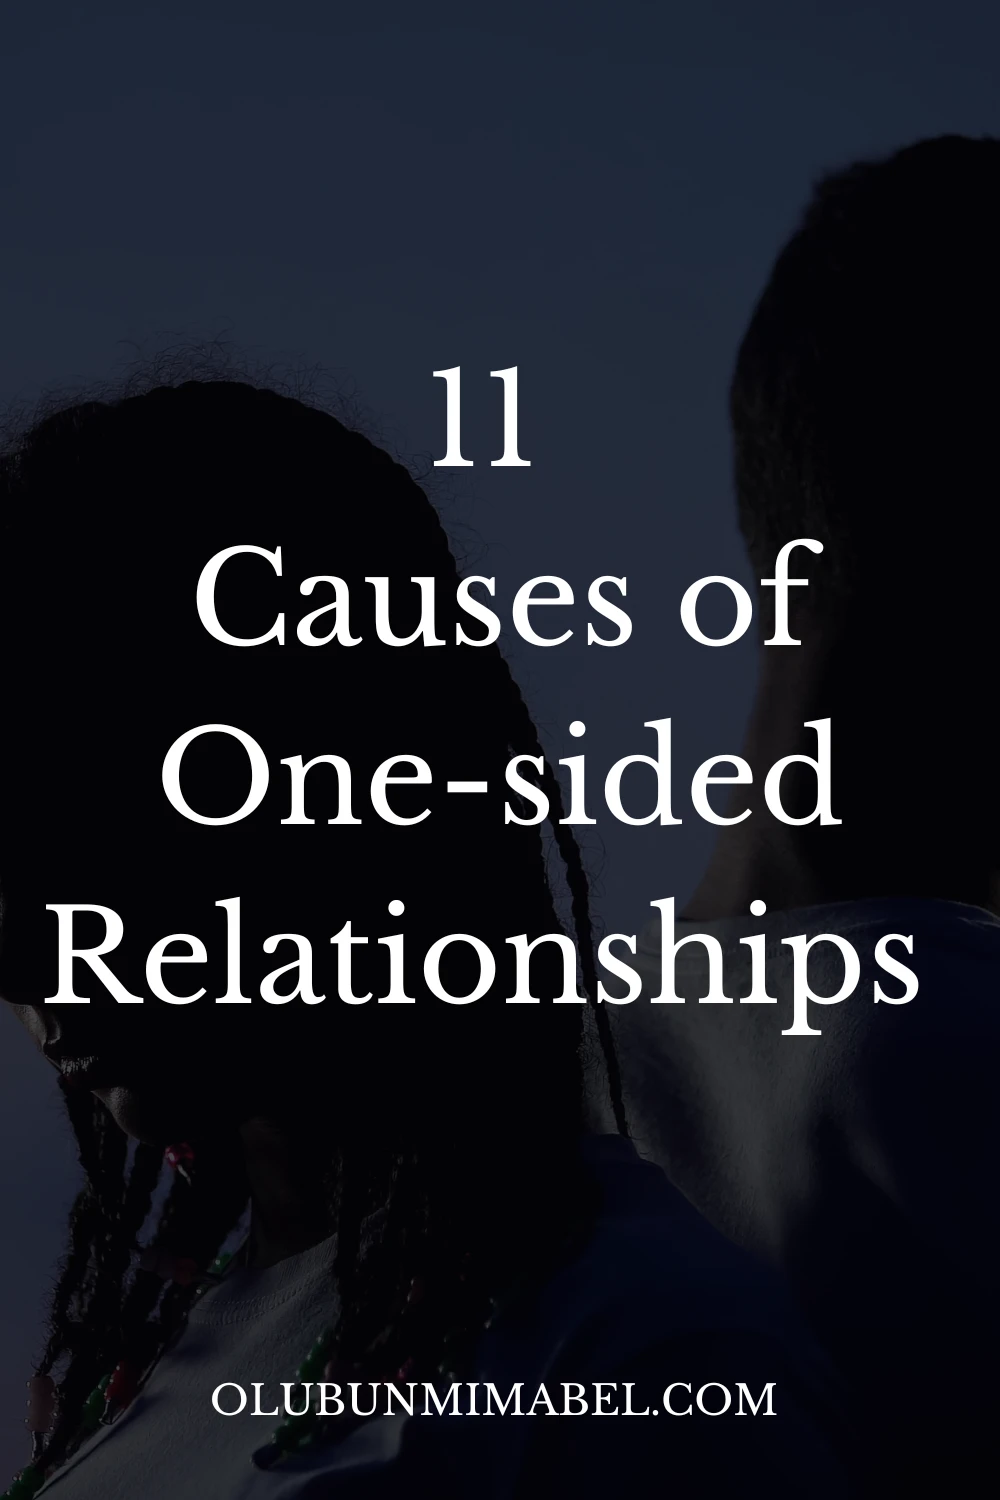 What Causes One-Sided Relationships?